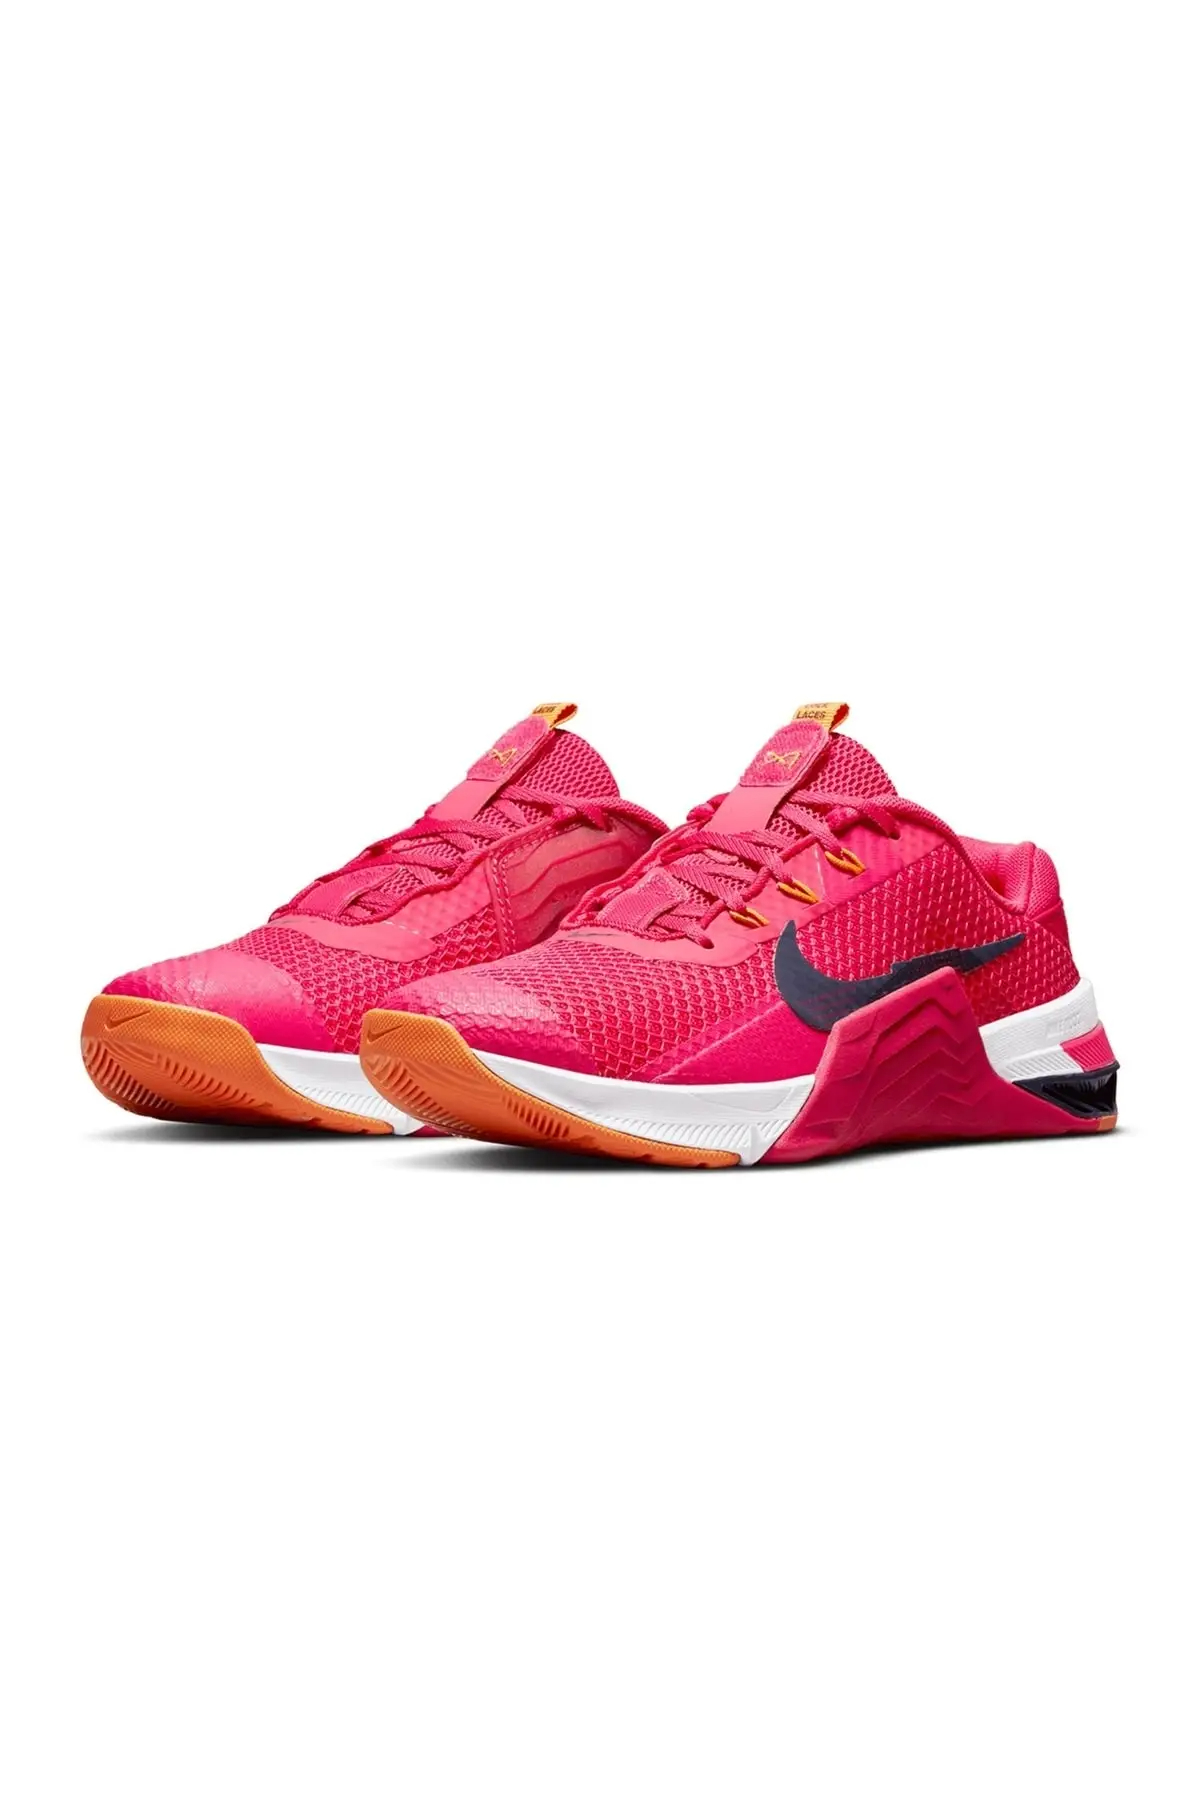 The allure of pink nike shoes women’s插图2